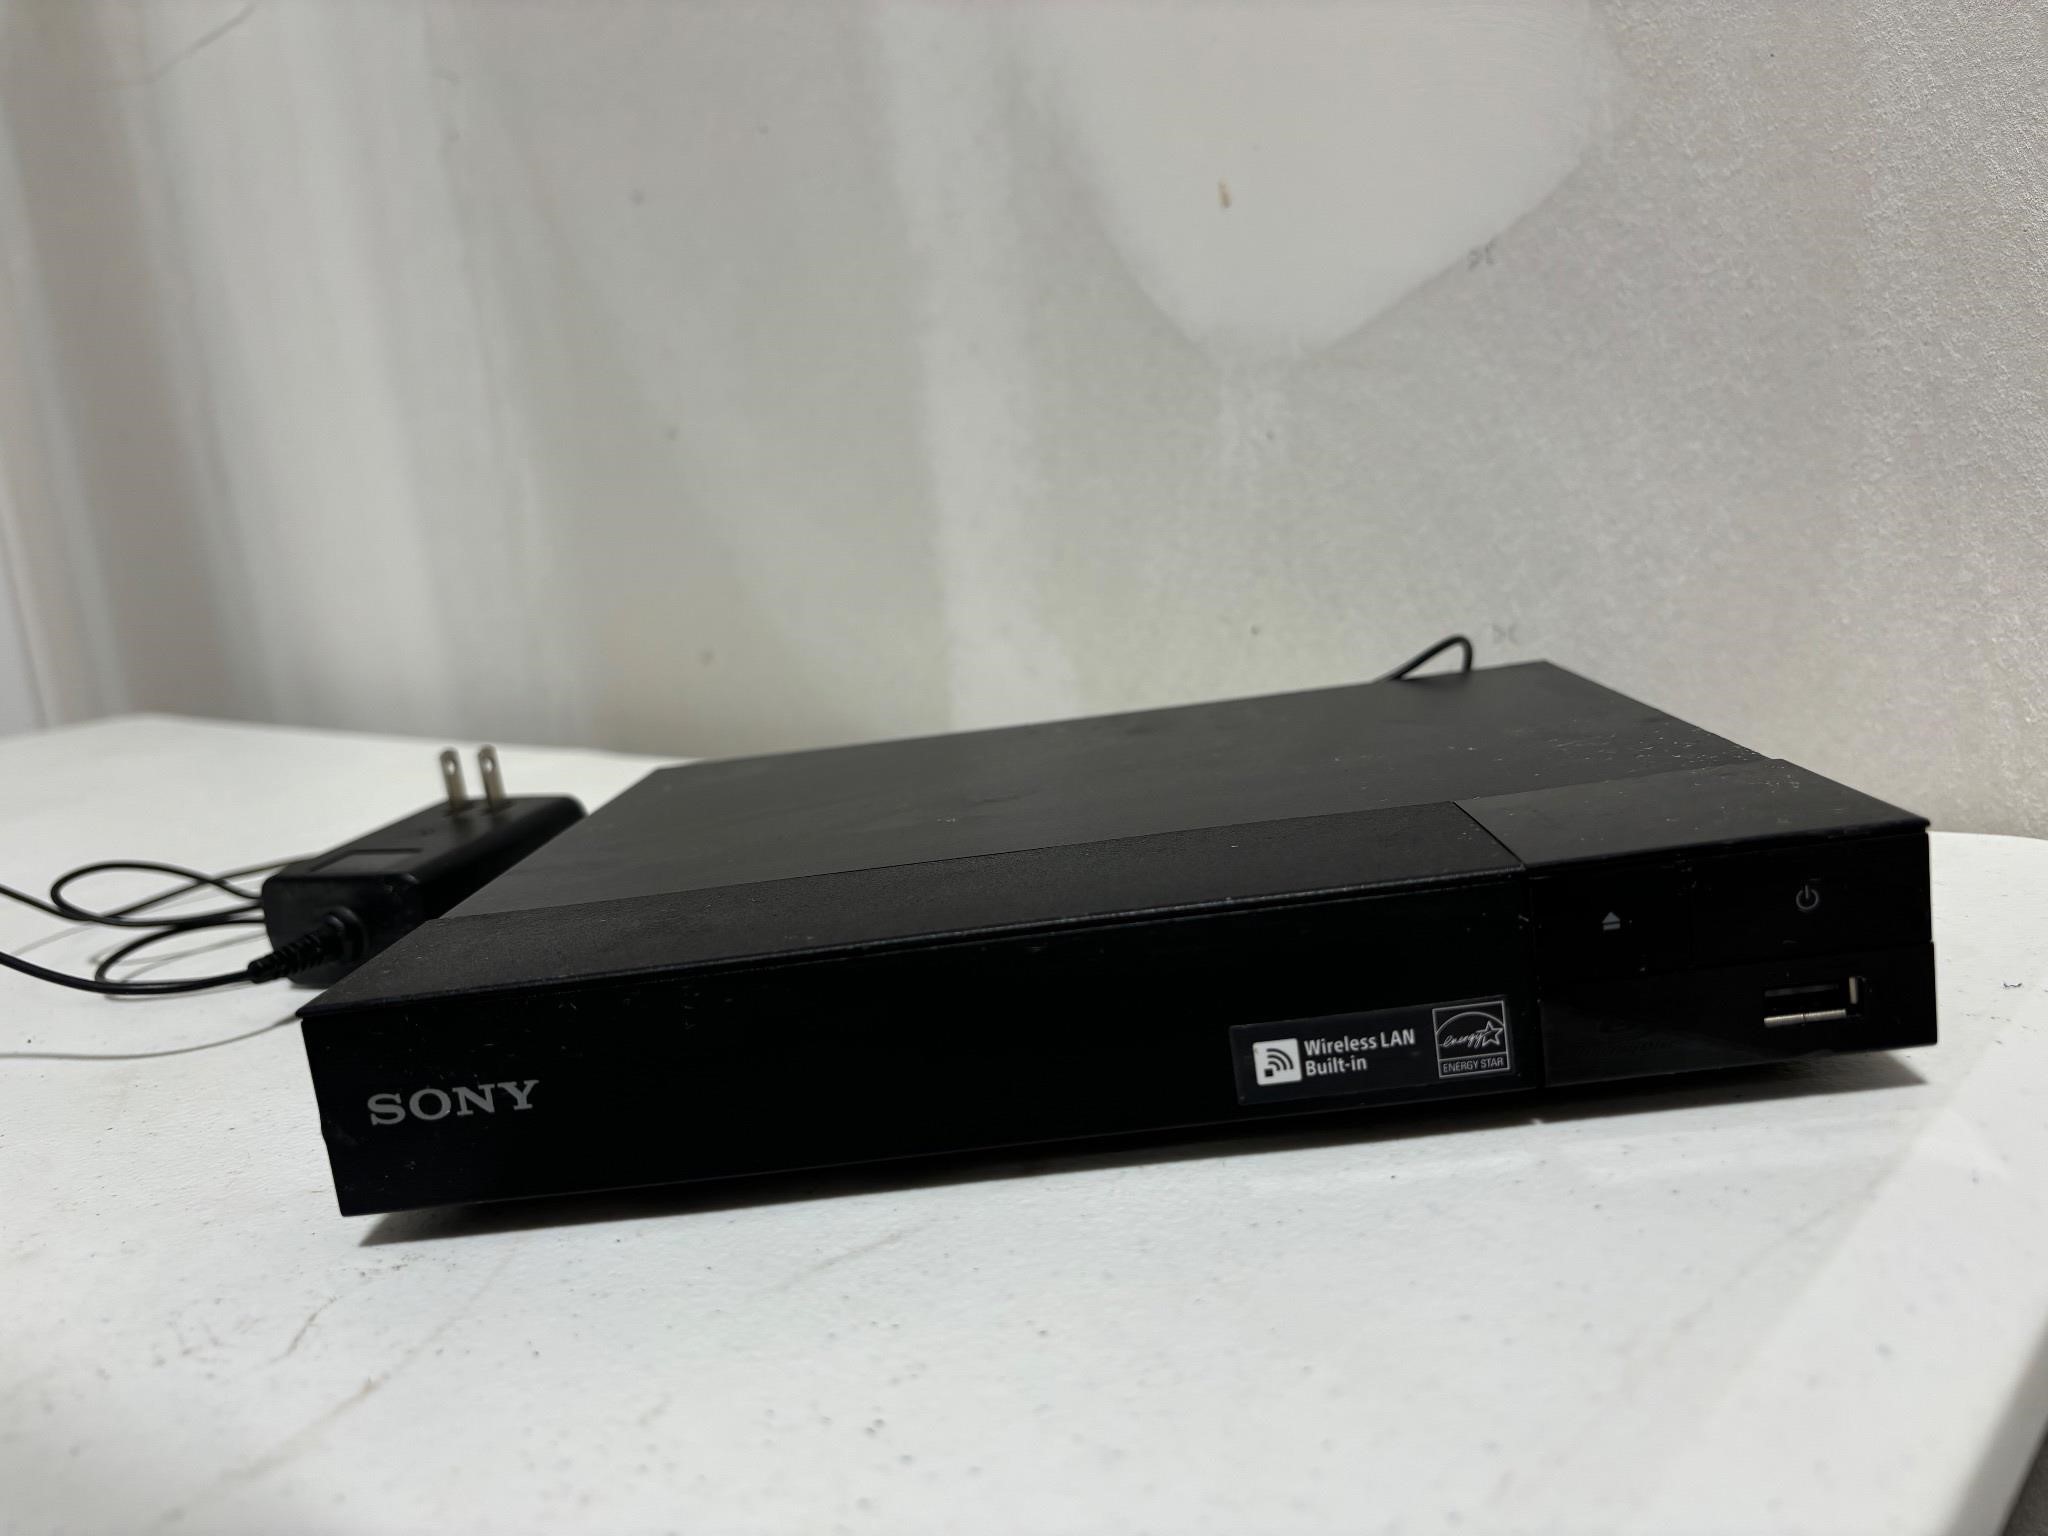 Sony Blu-ray player with built in WiFi